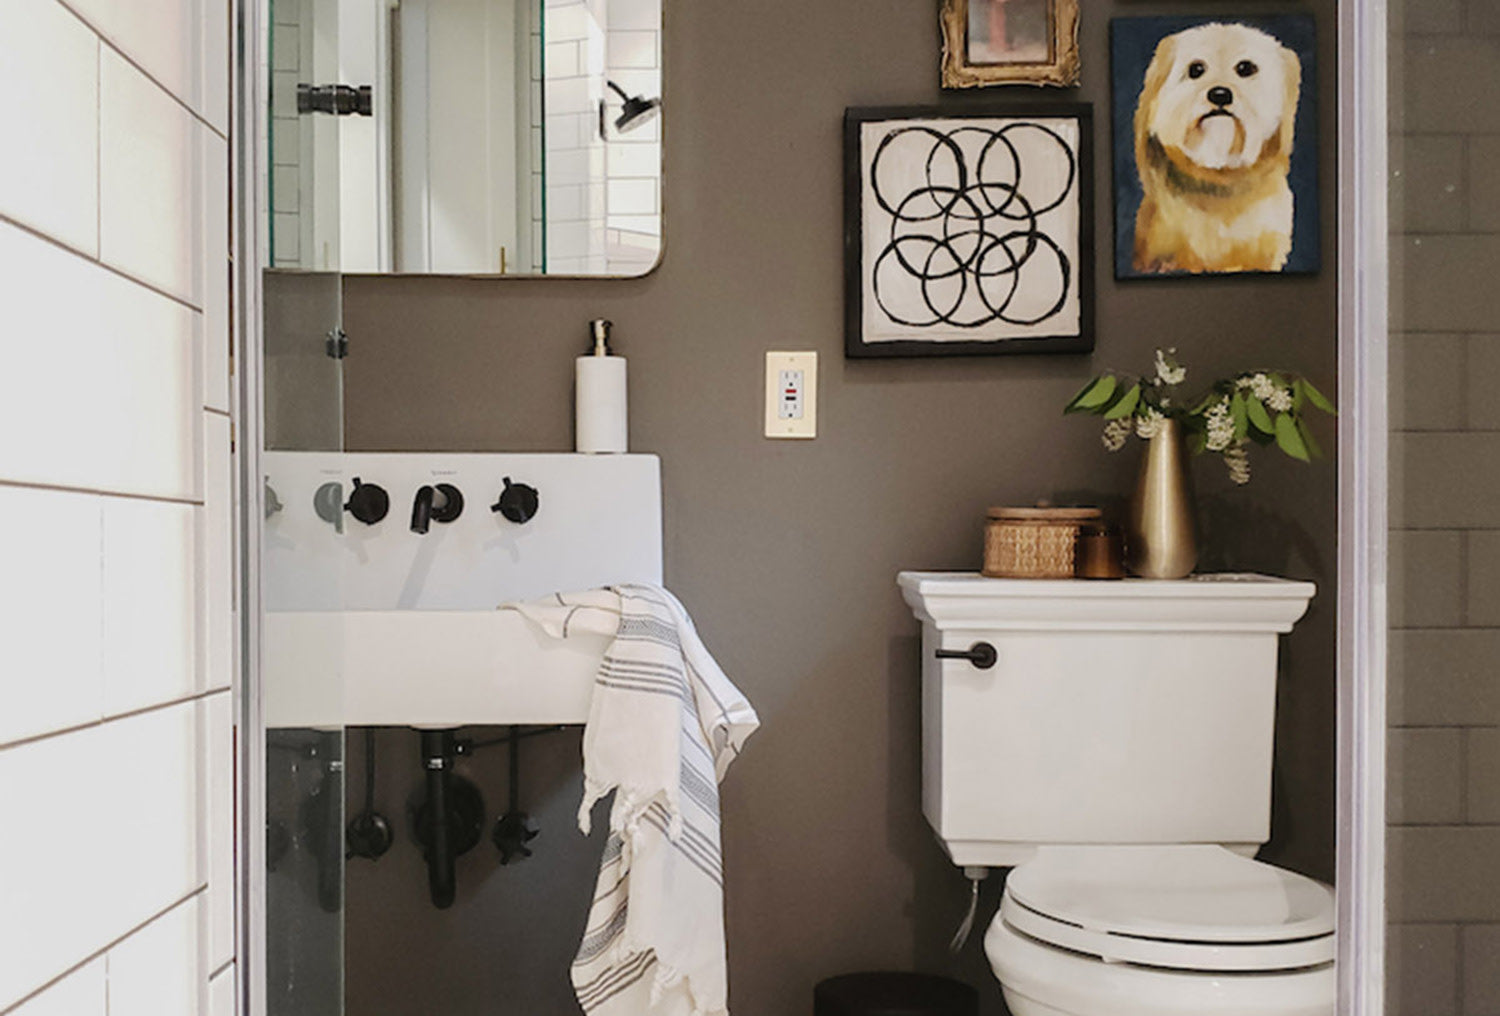 Interior Designers Share the Bathroom Trends in and Out This Season